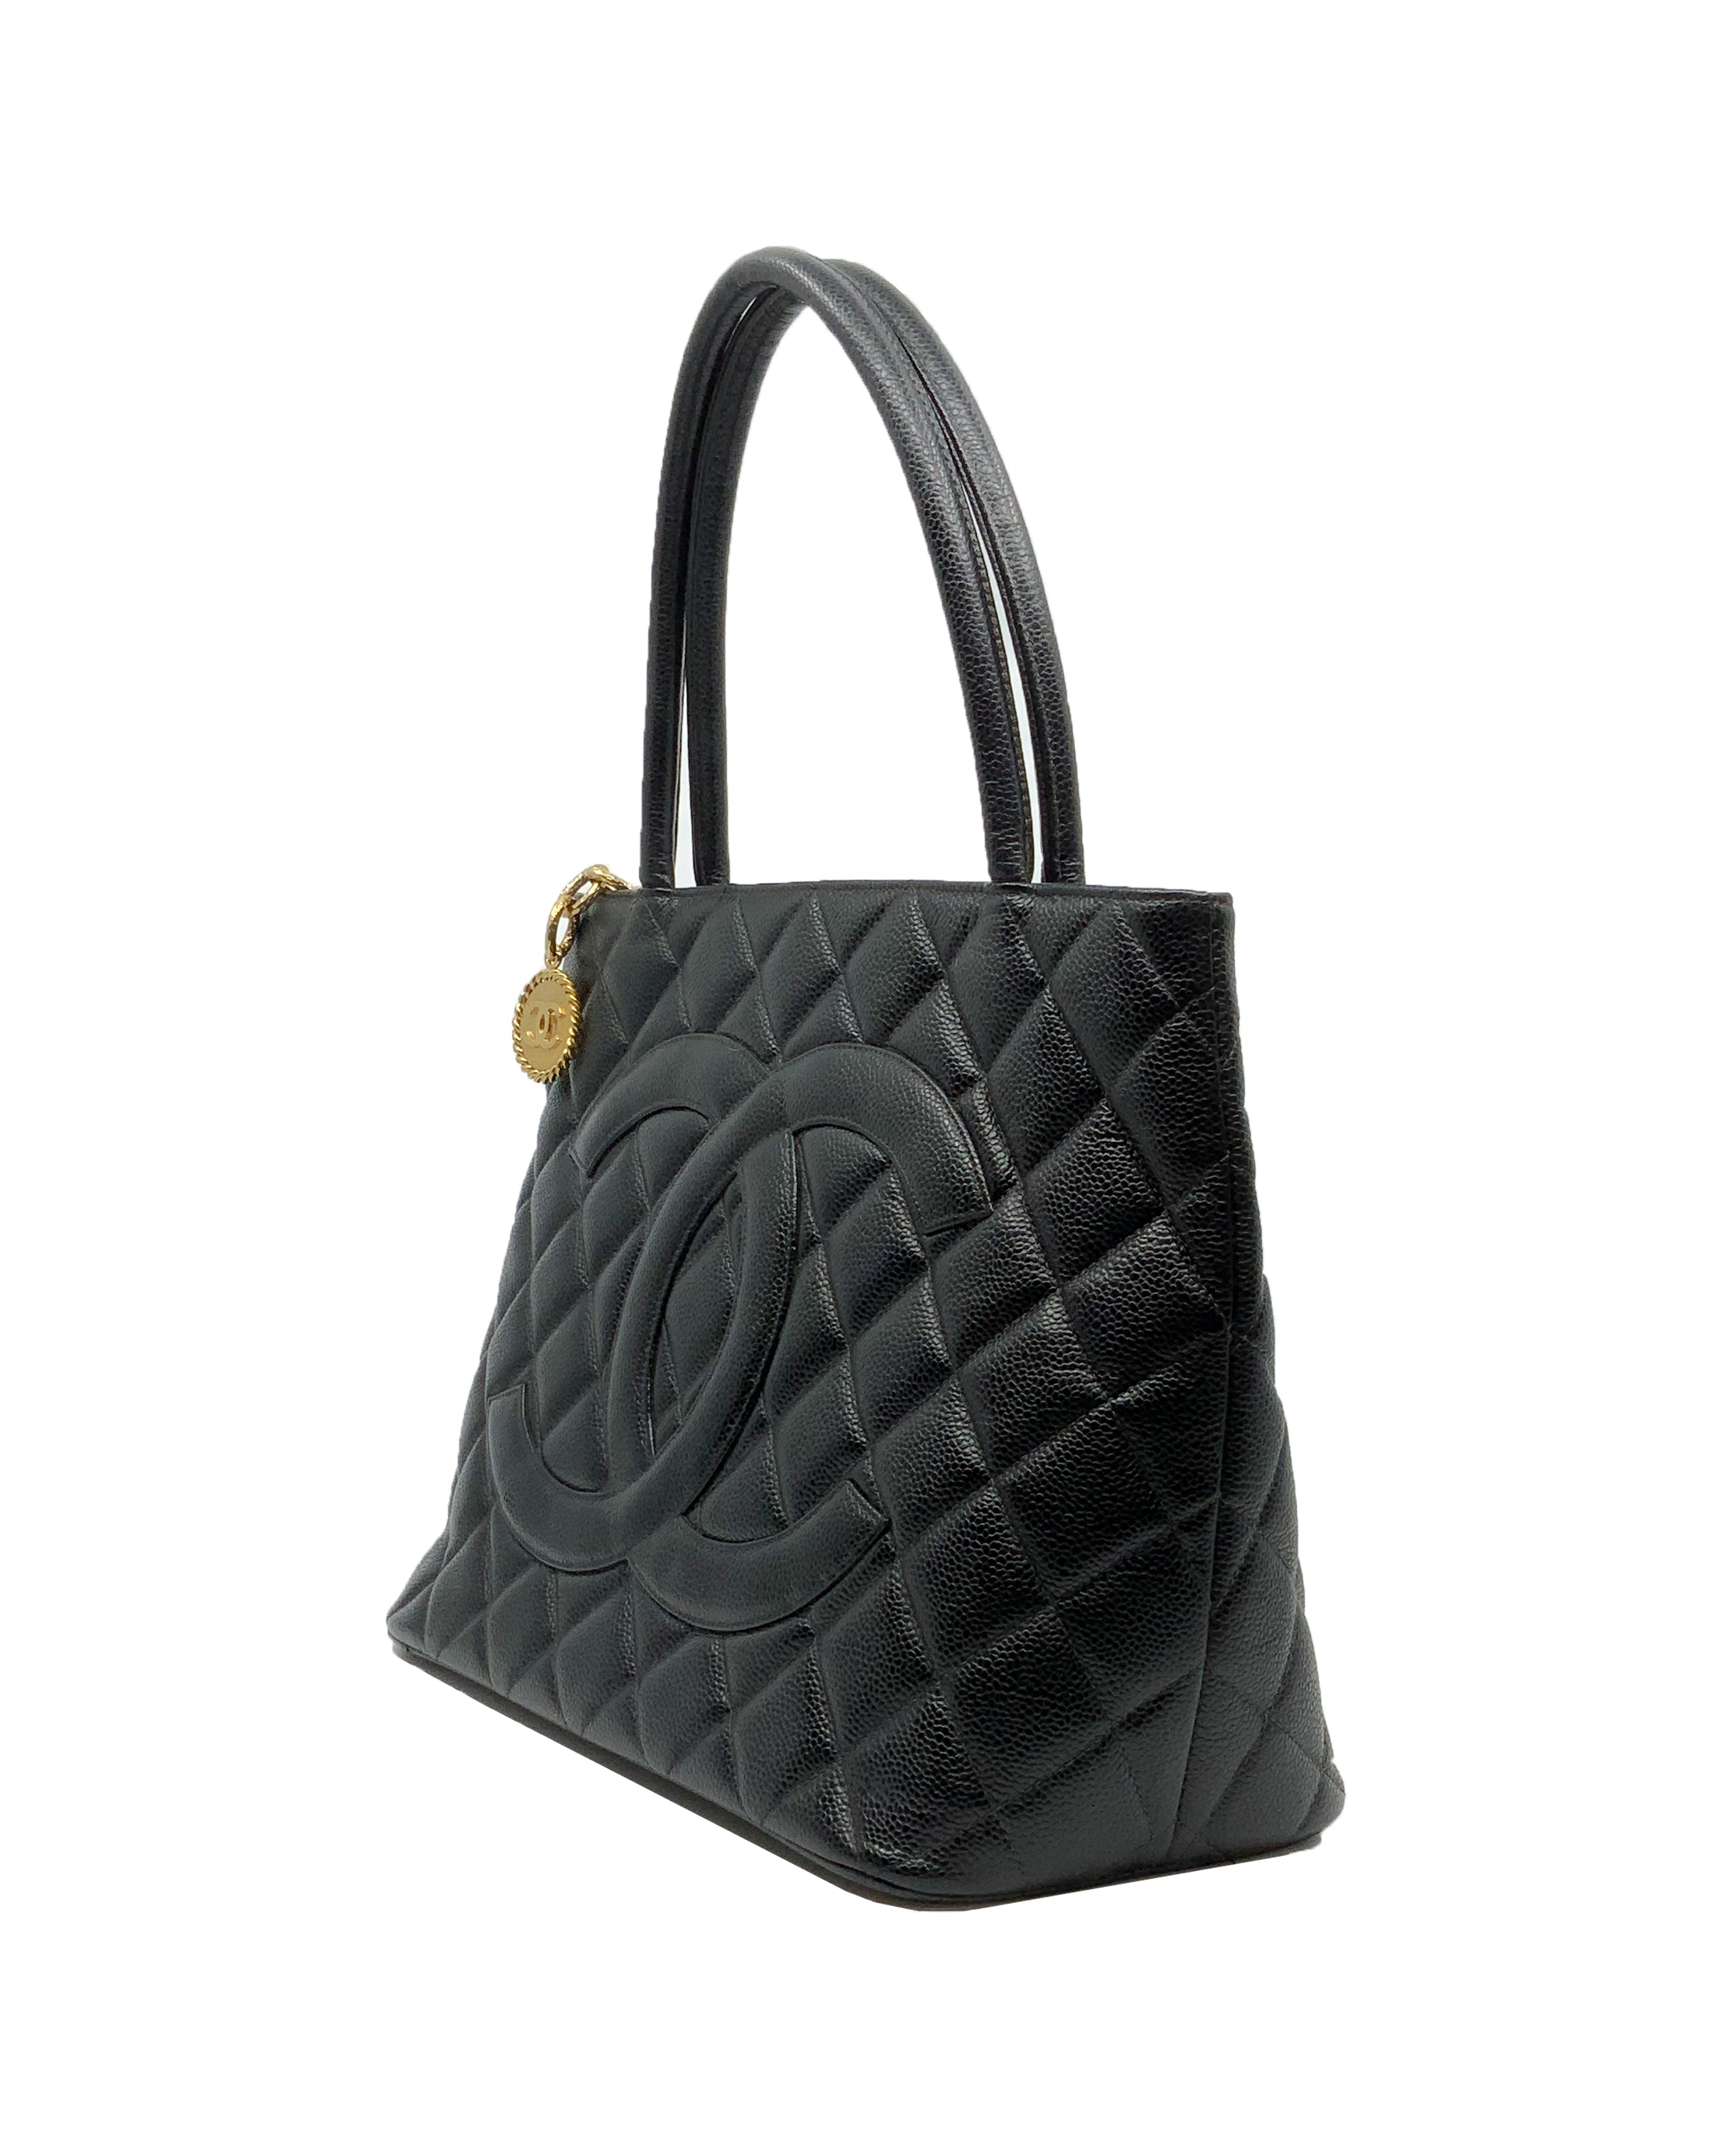 CHANEL Black Caviar CC Quilted Medallion Tote Bag